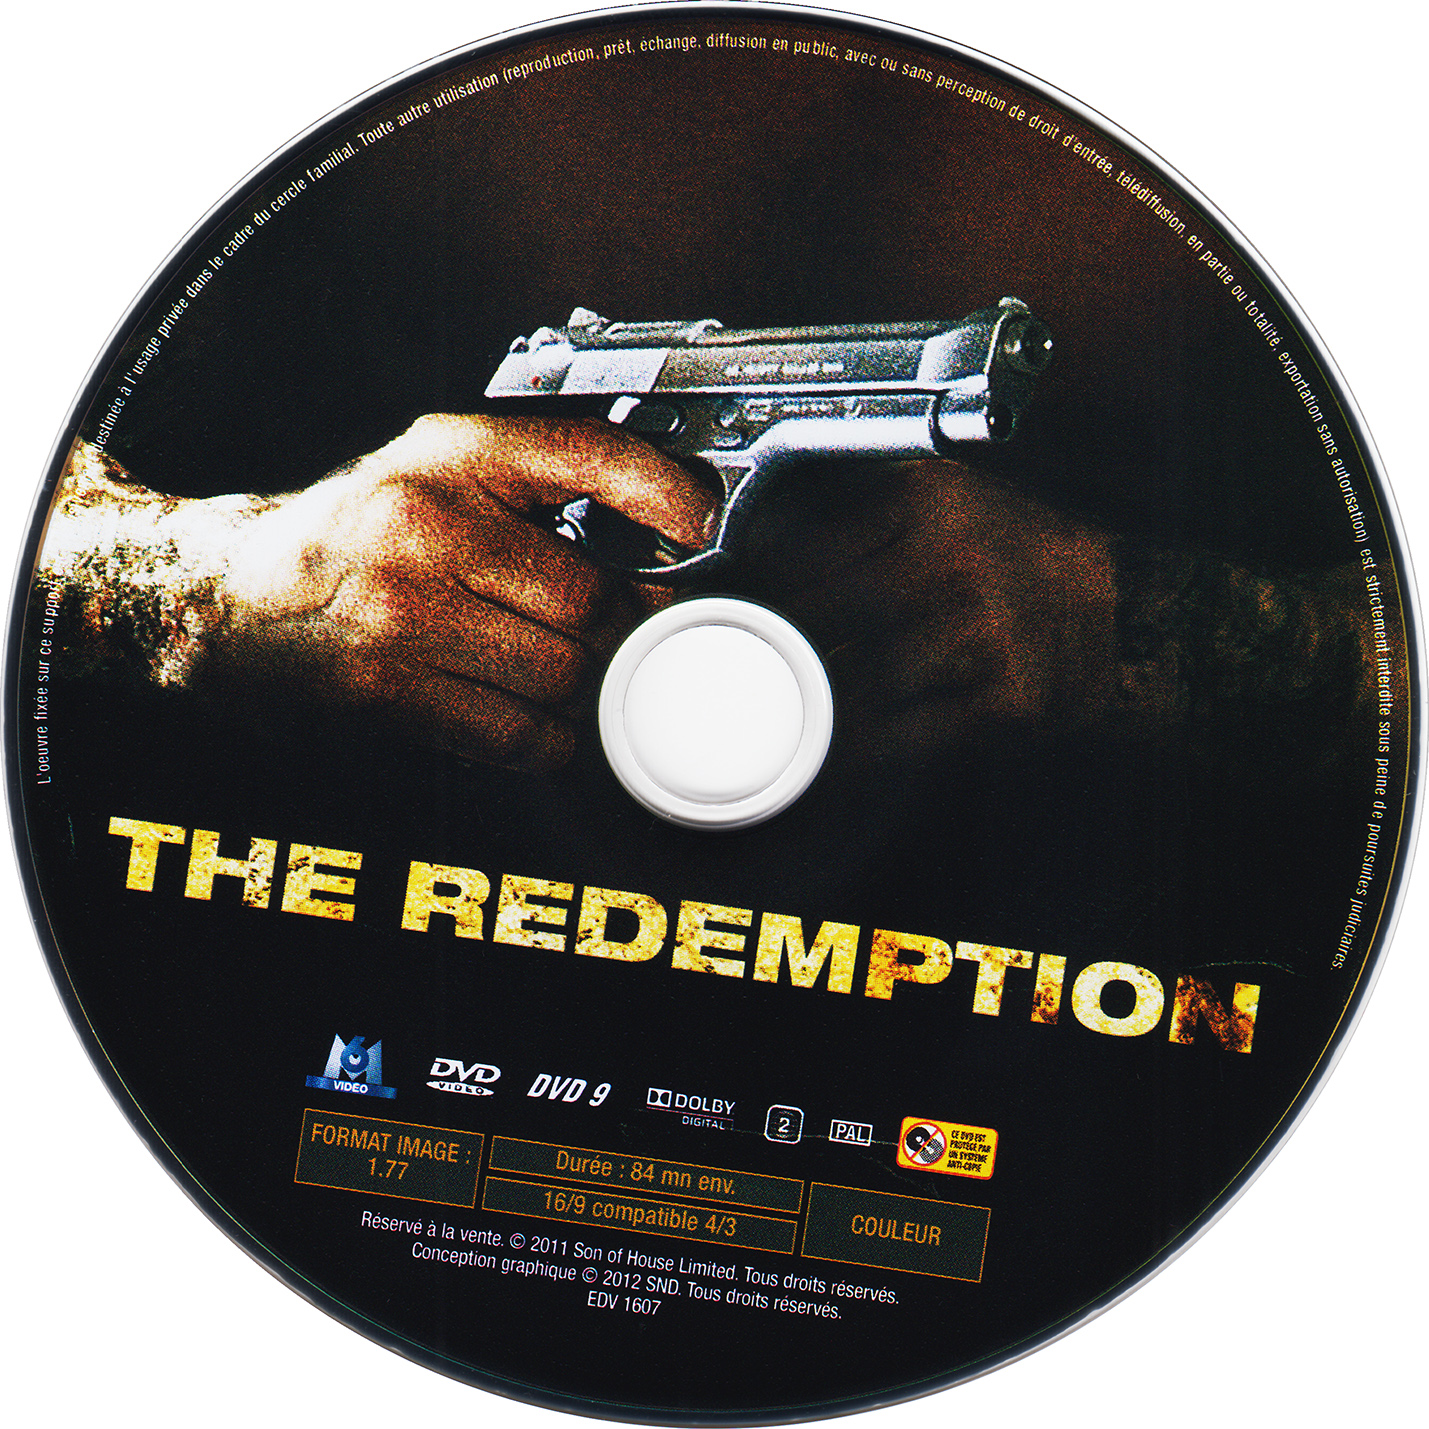 The redemption